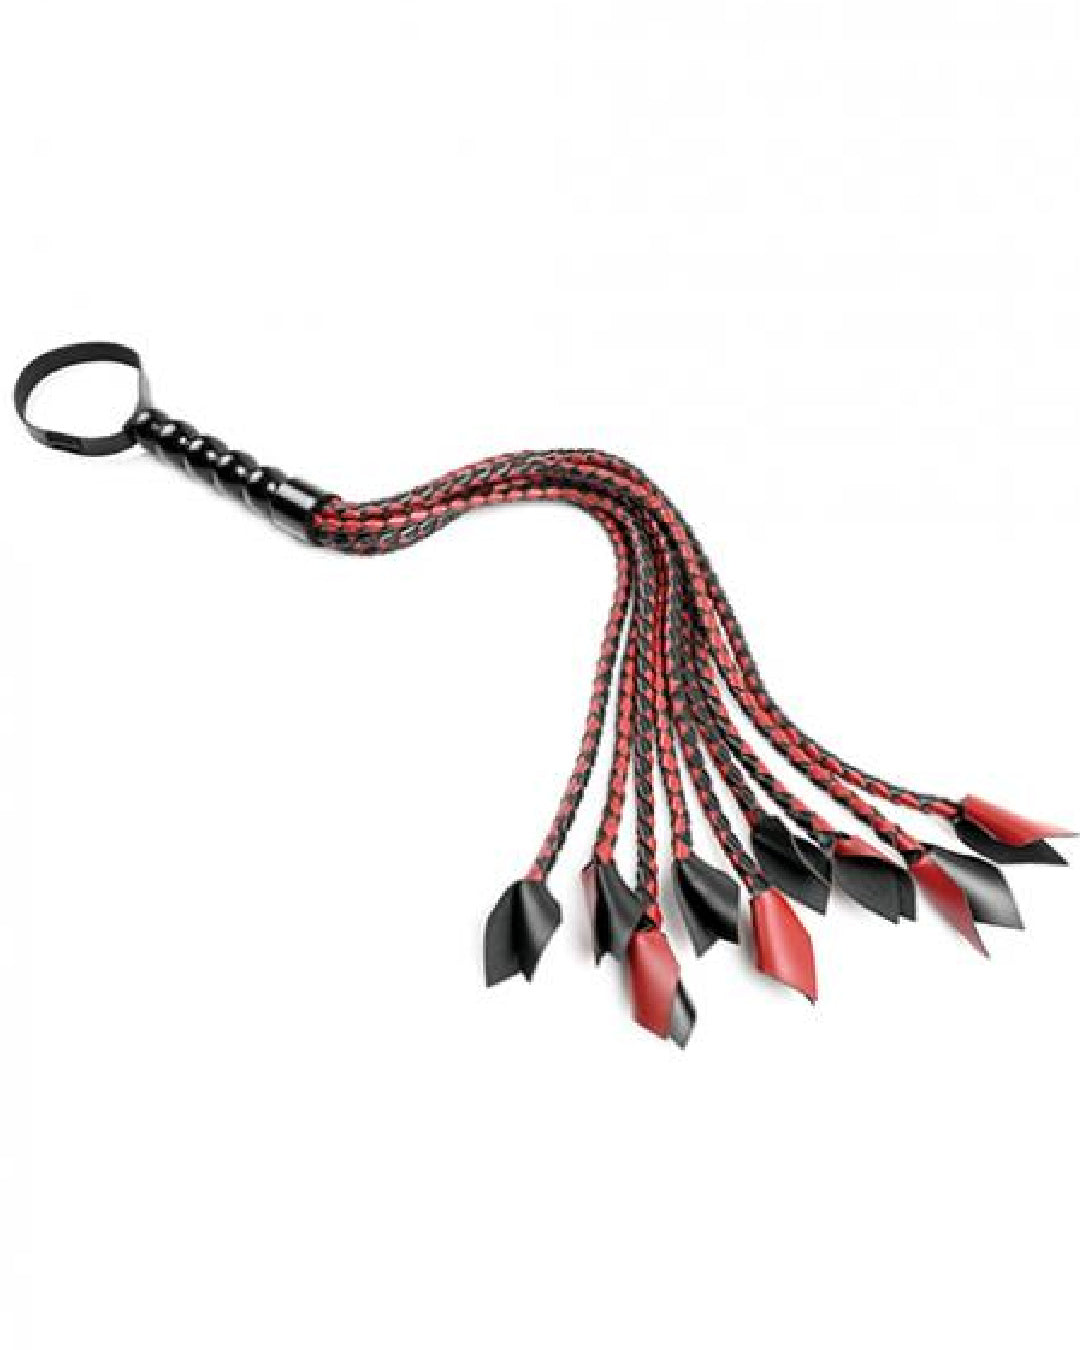 Saffron Braided Flogger by Sportsheets  laying spread out on white background 